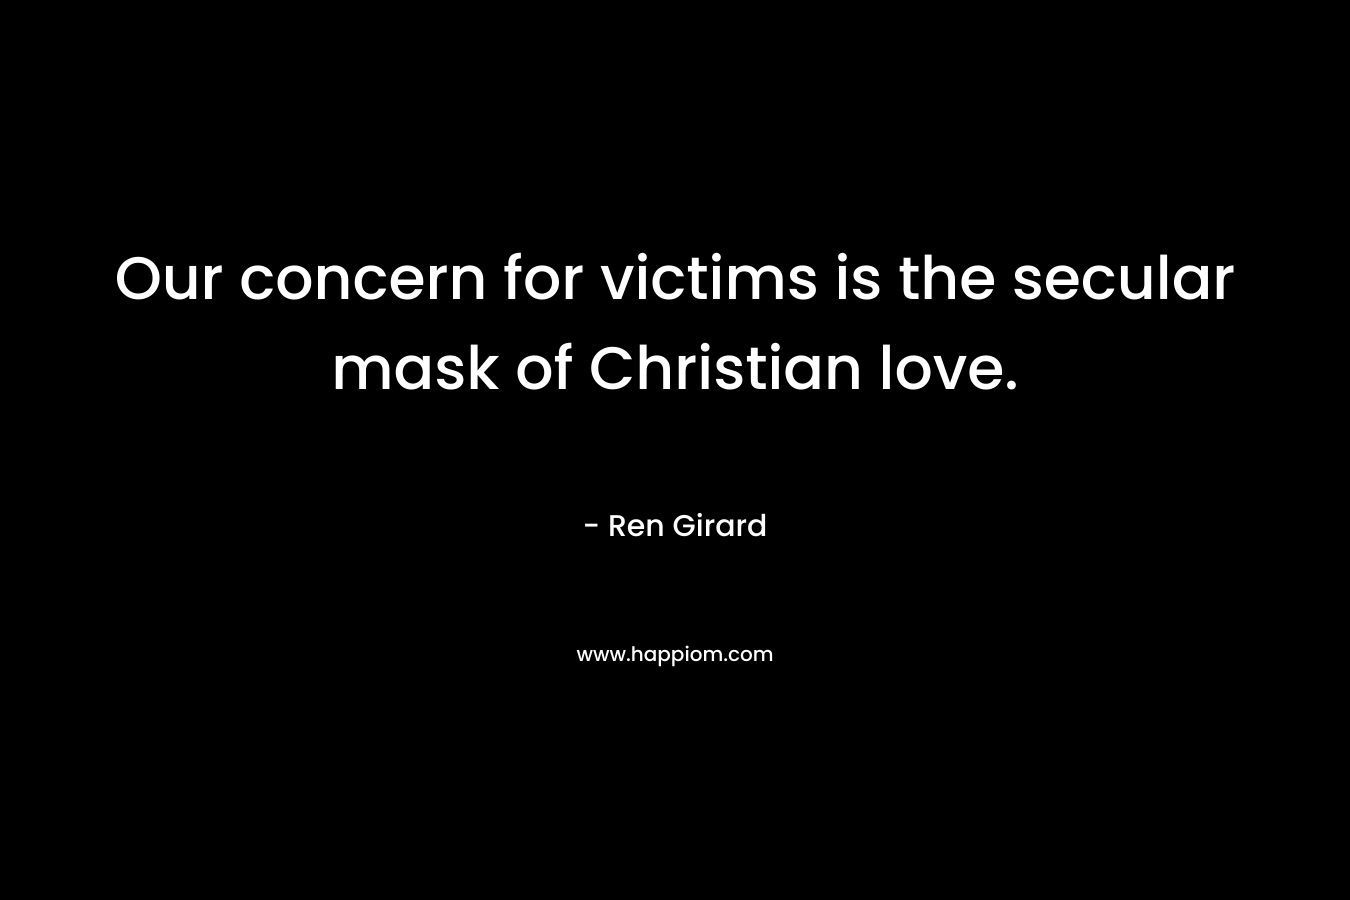 Our concern for victims is the secular mask of Christian love.